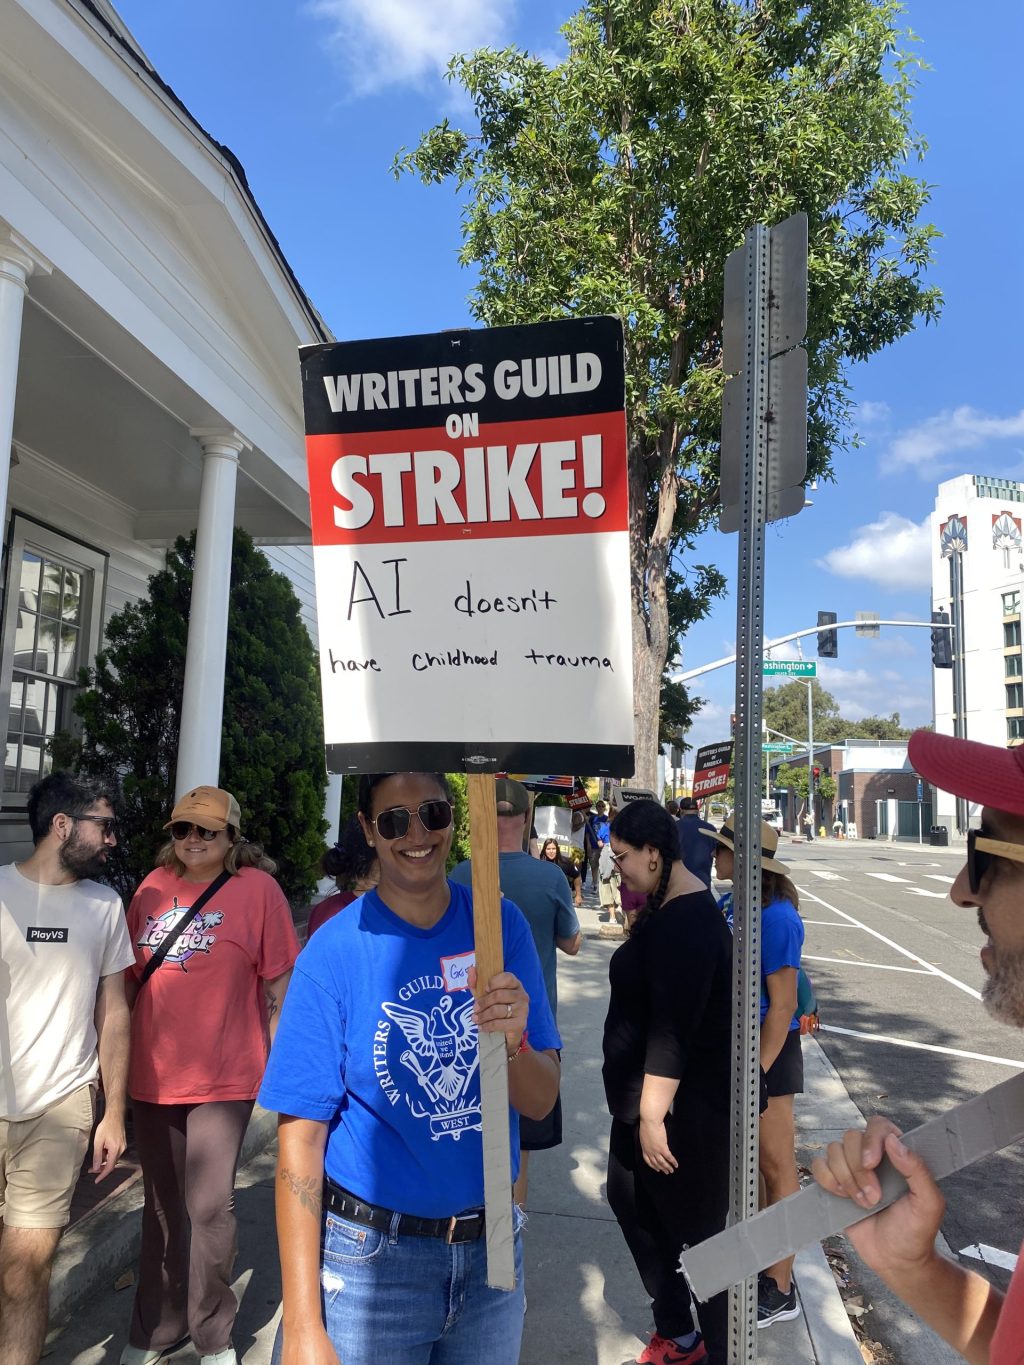 A member of the Writers Guild of America striking at a protest. Photo by Samantha Torre